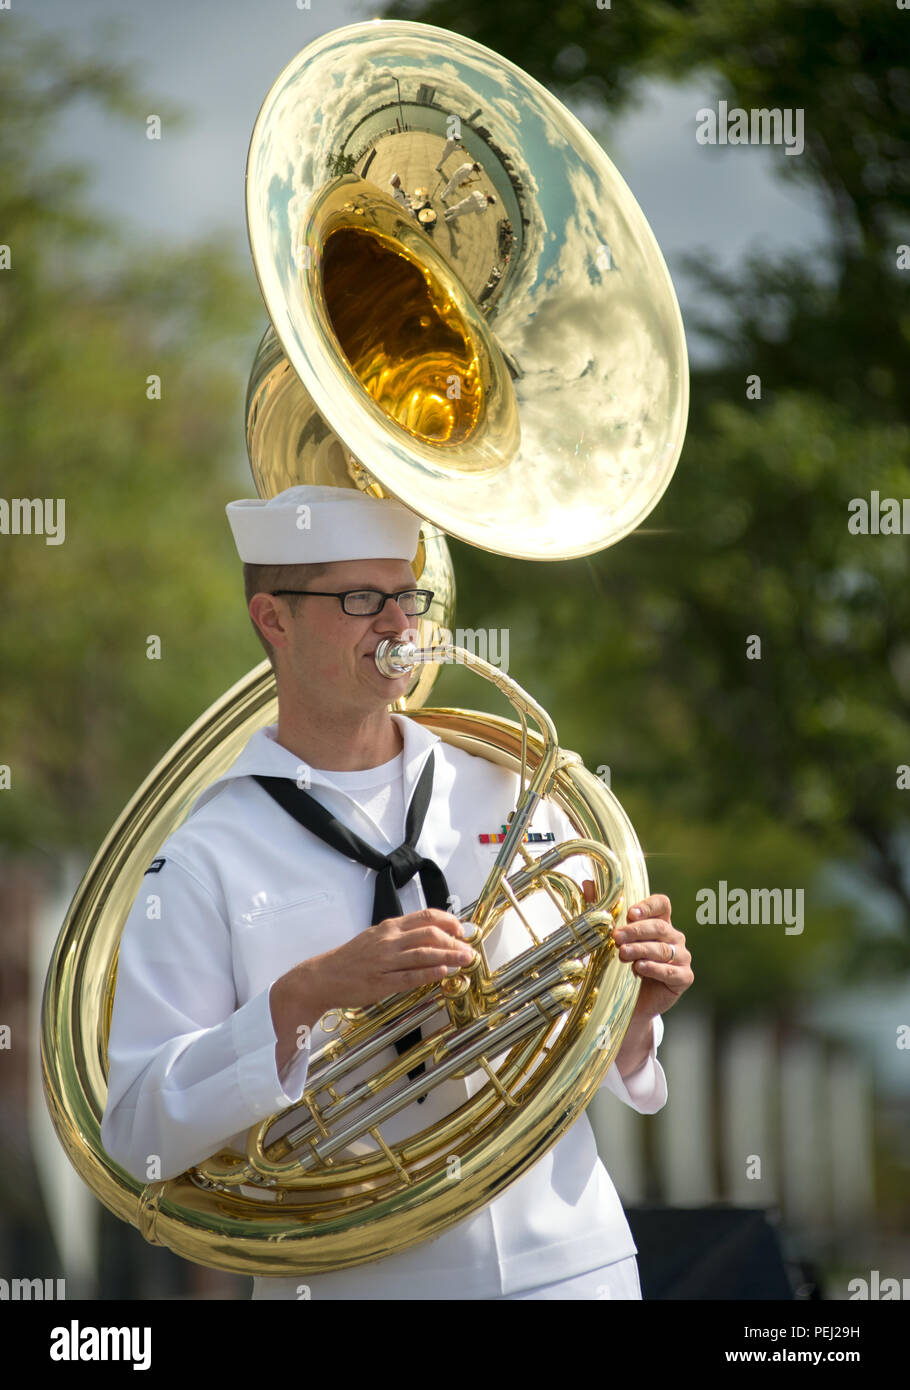 150826-N-CI175-054 DETROIT, Mich. (Aug. 26, 2015) Musician 3rd Class Collin Moos, assigned to the Navy Band Great Lakes Brass Band, plays in a concert along Detroit’s downtown RiverWalk as part of Detroit Navy Week. Navy Weeks focus a variety of assets, equipment and personnel on a single city for a week-long series of engagements designed to bring America's Navy closer to the people it protects, in cities that don't have a large naval presence. (U.S. Navy photo by Mass Communication Specialist 1st Class Jon Rasmussen/Released) Stock Photo